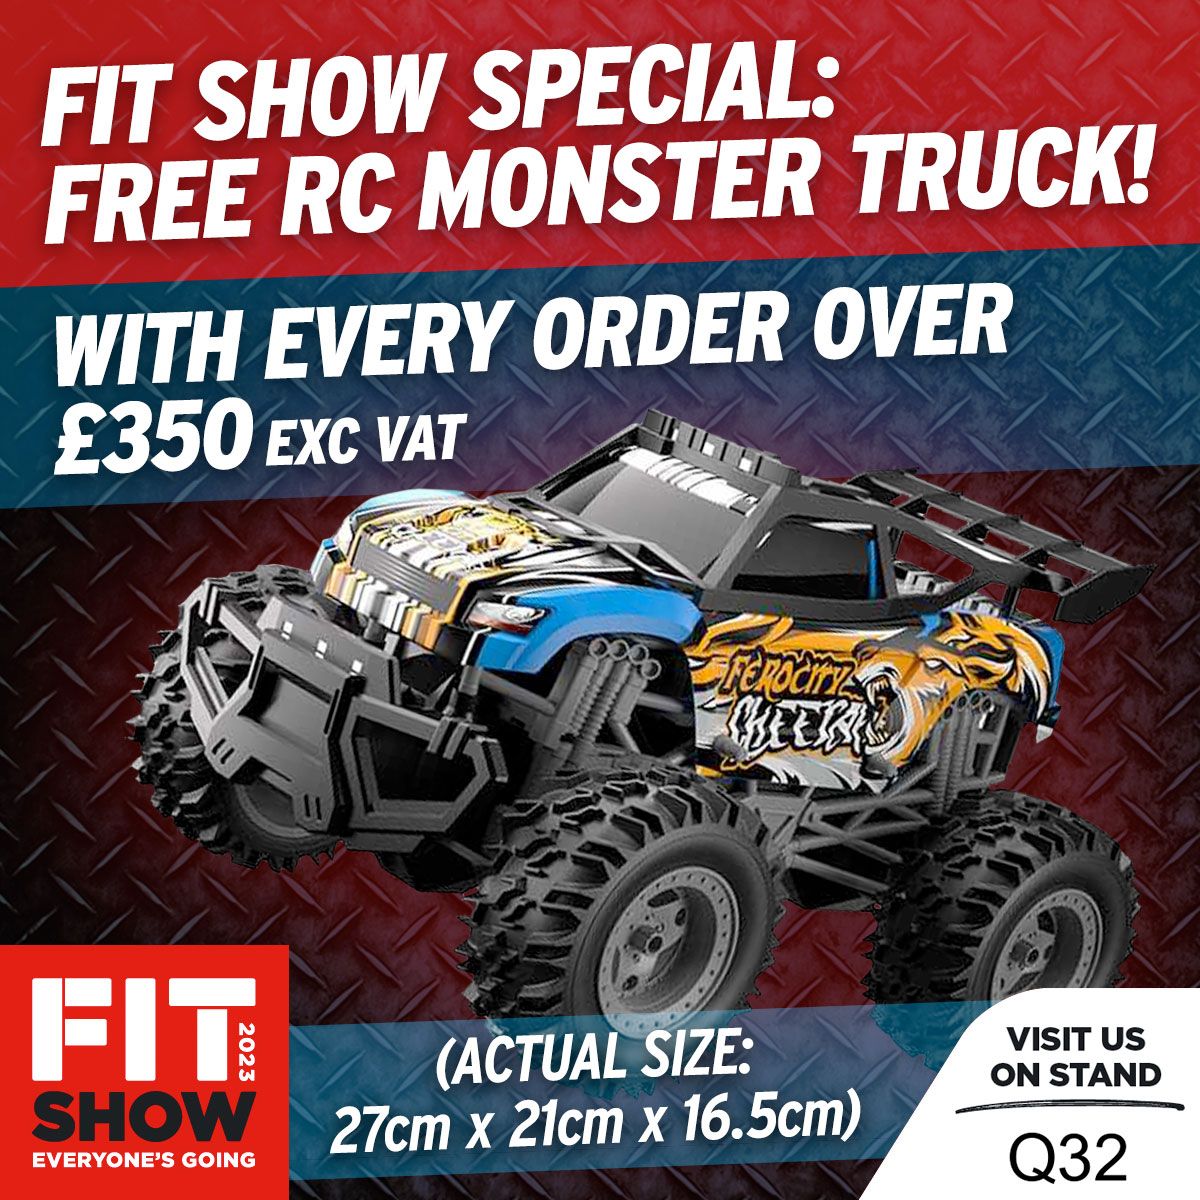 FIT SHOW SPECIAL OFFER